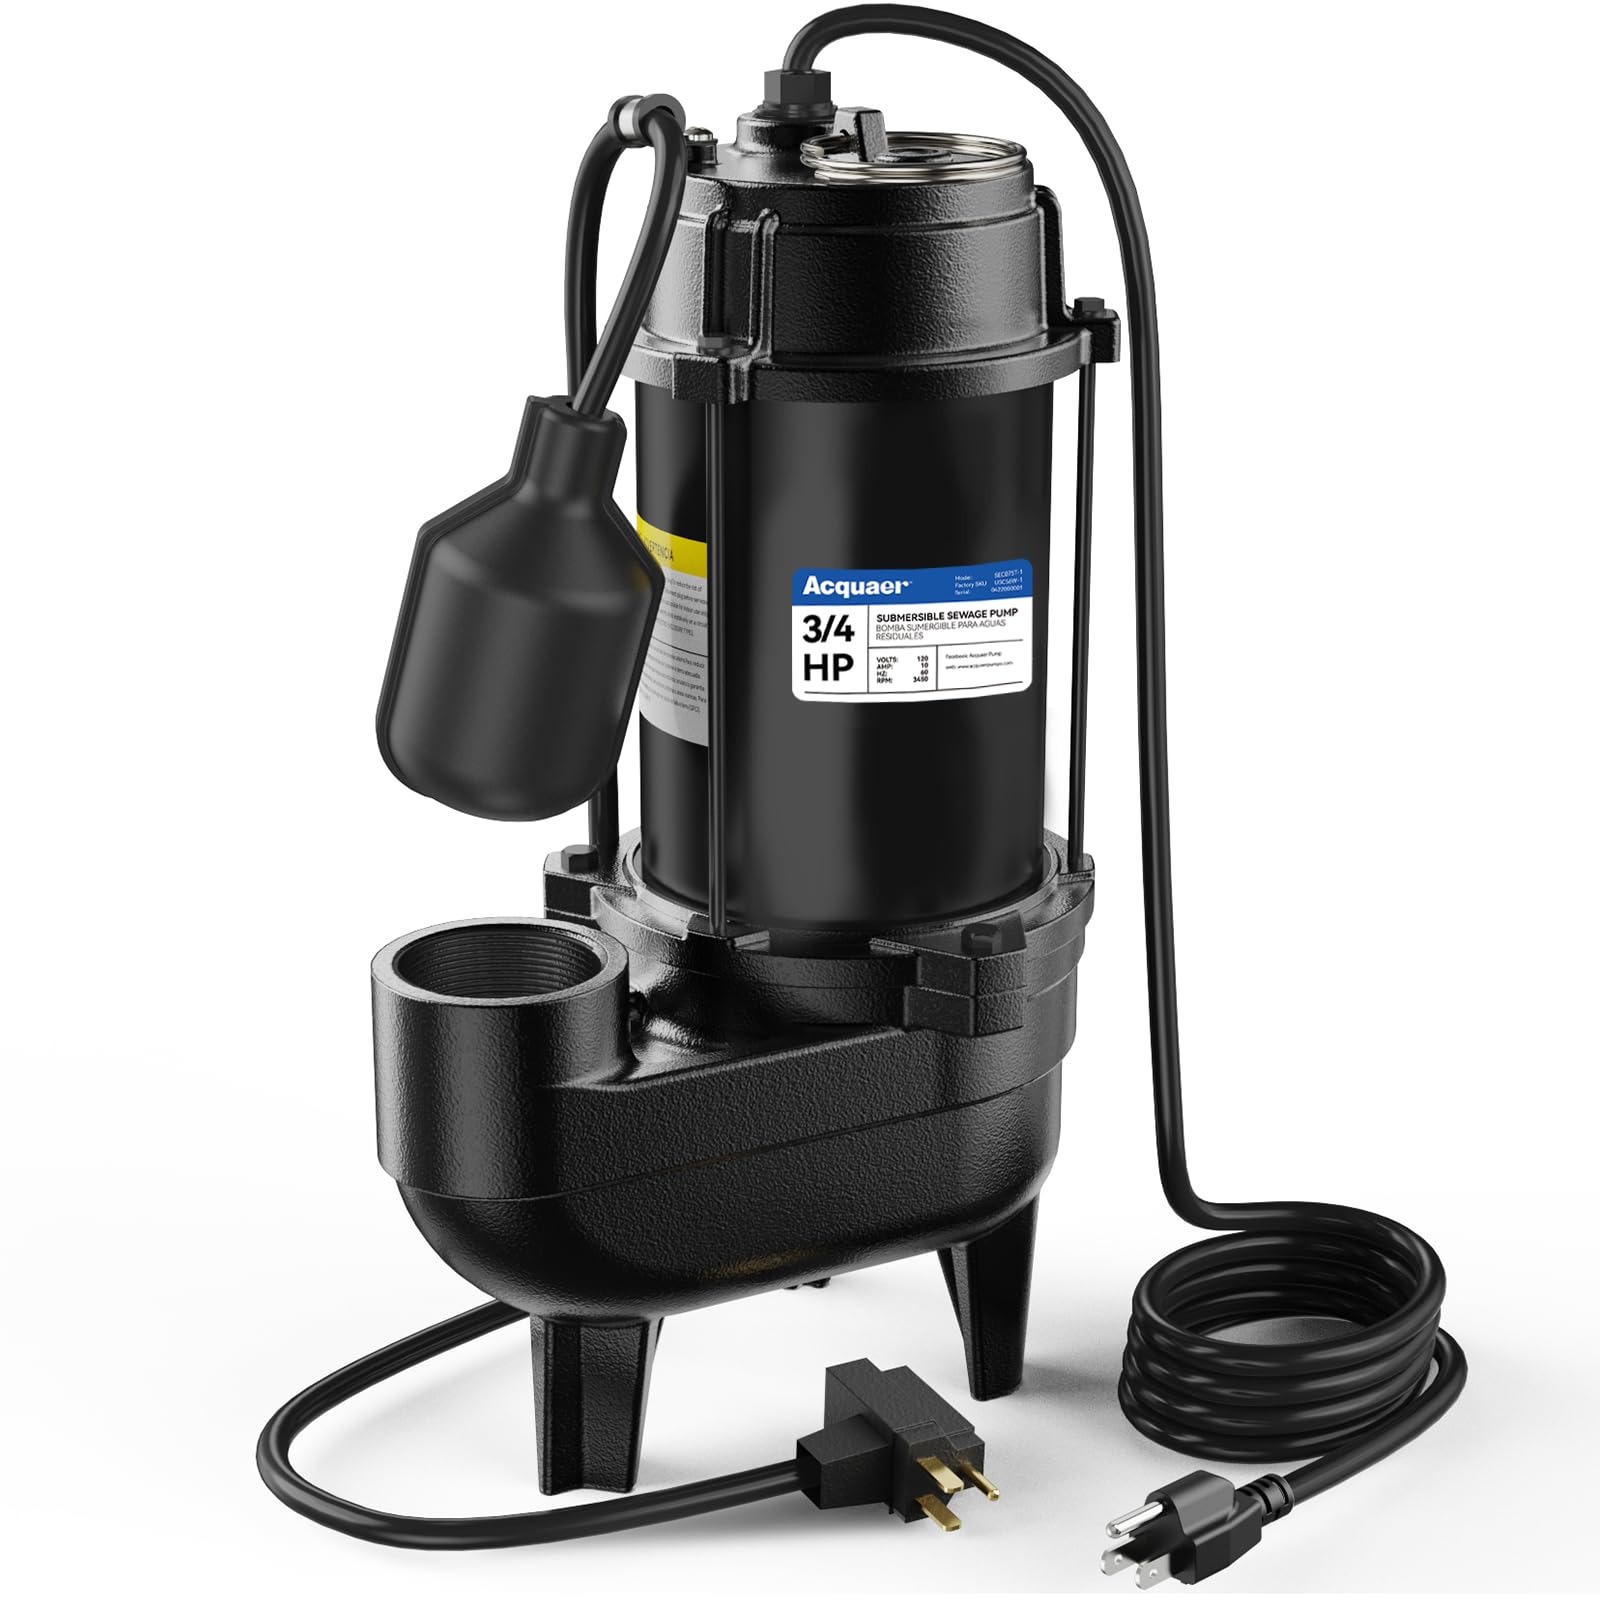 Acquaer 1/3 HP Submersible Water Pump 2160GPH Sump Pump Thermoplastic  Utility Pump Portable Electric Water Pump Water Remove for Basement Hot  Tubs